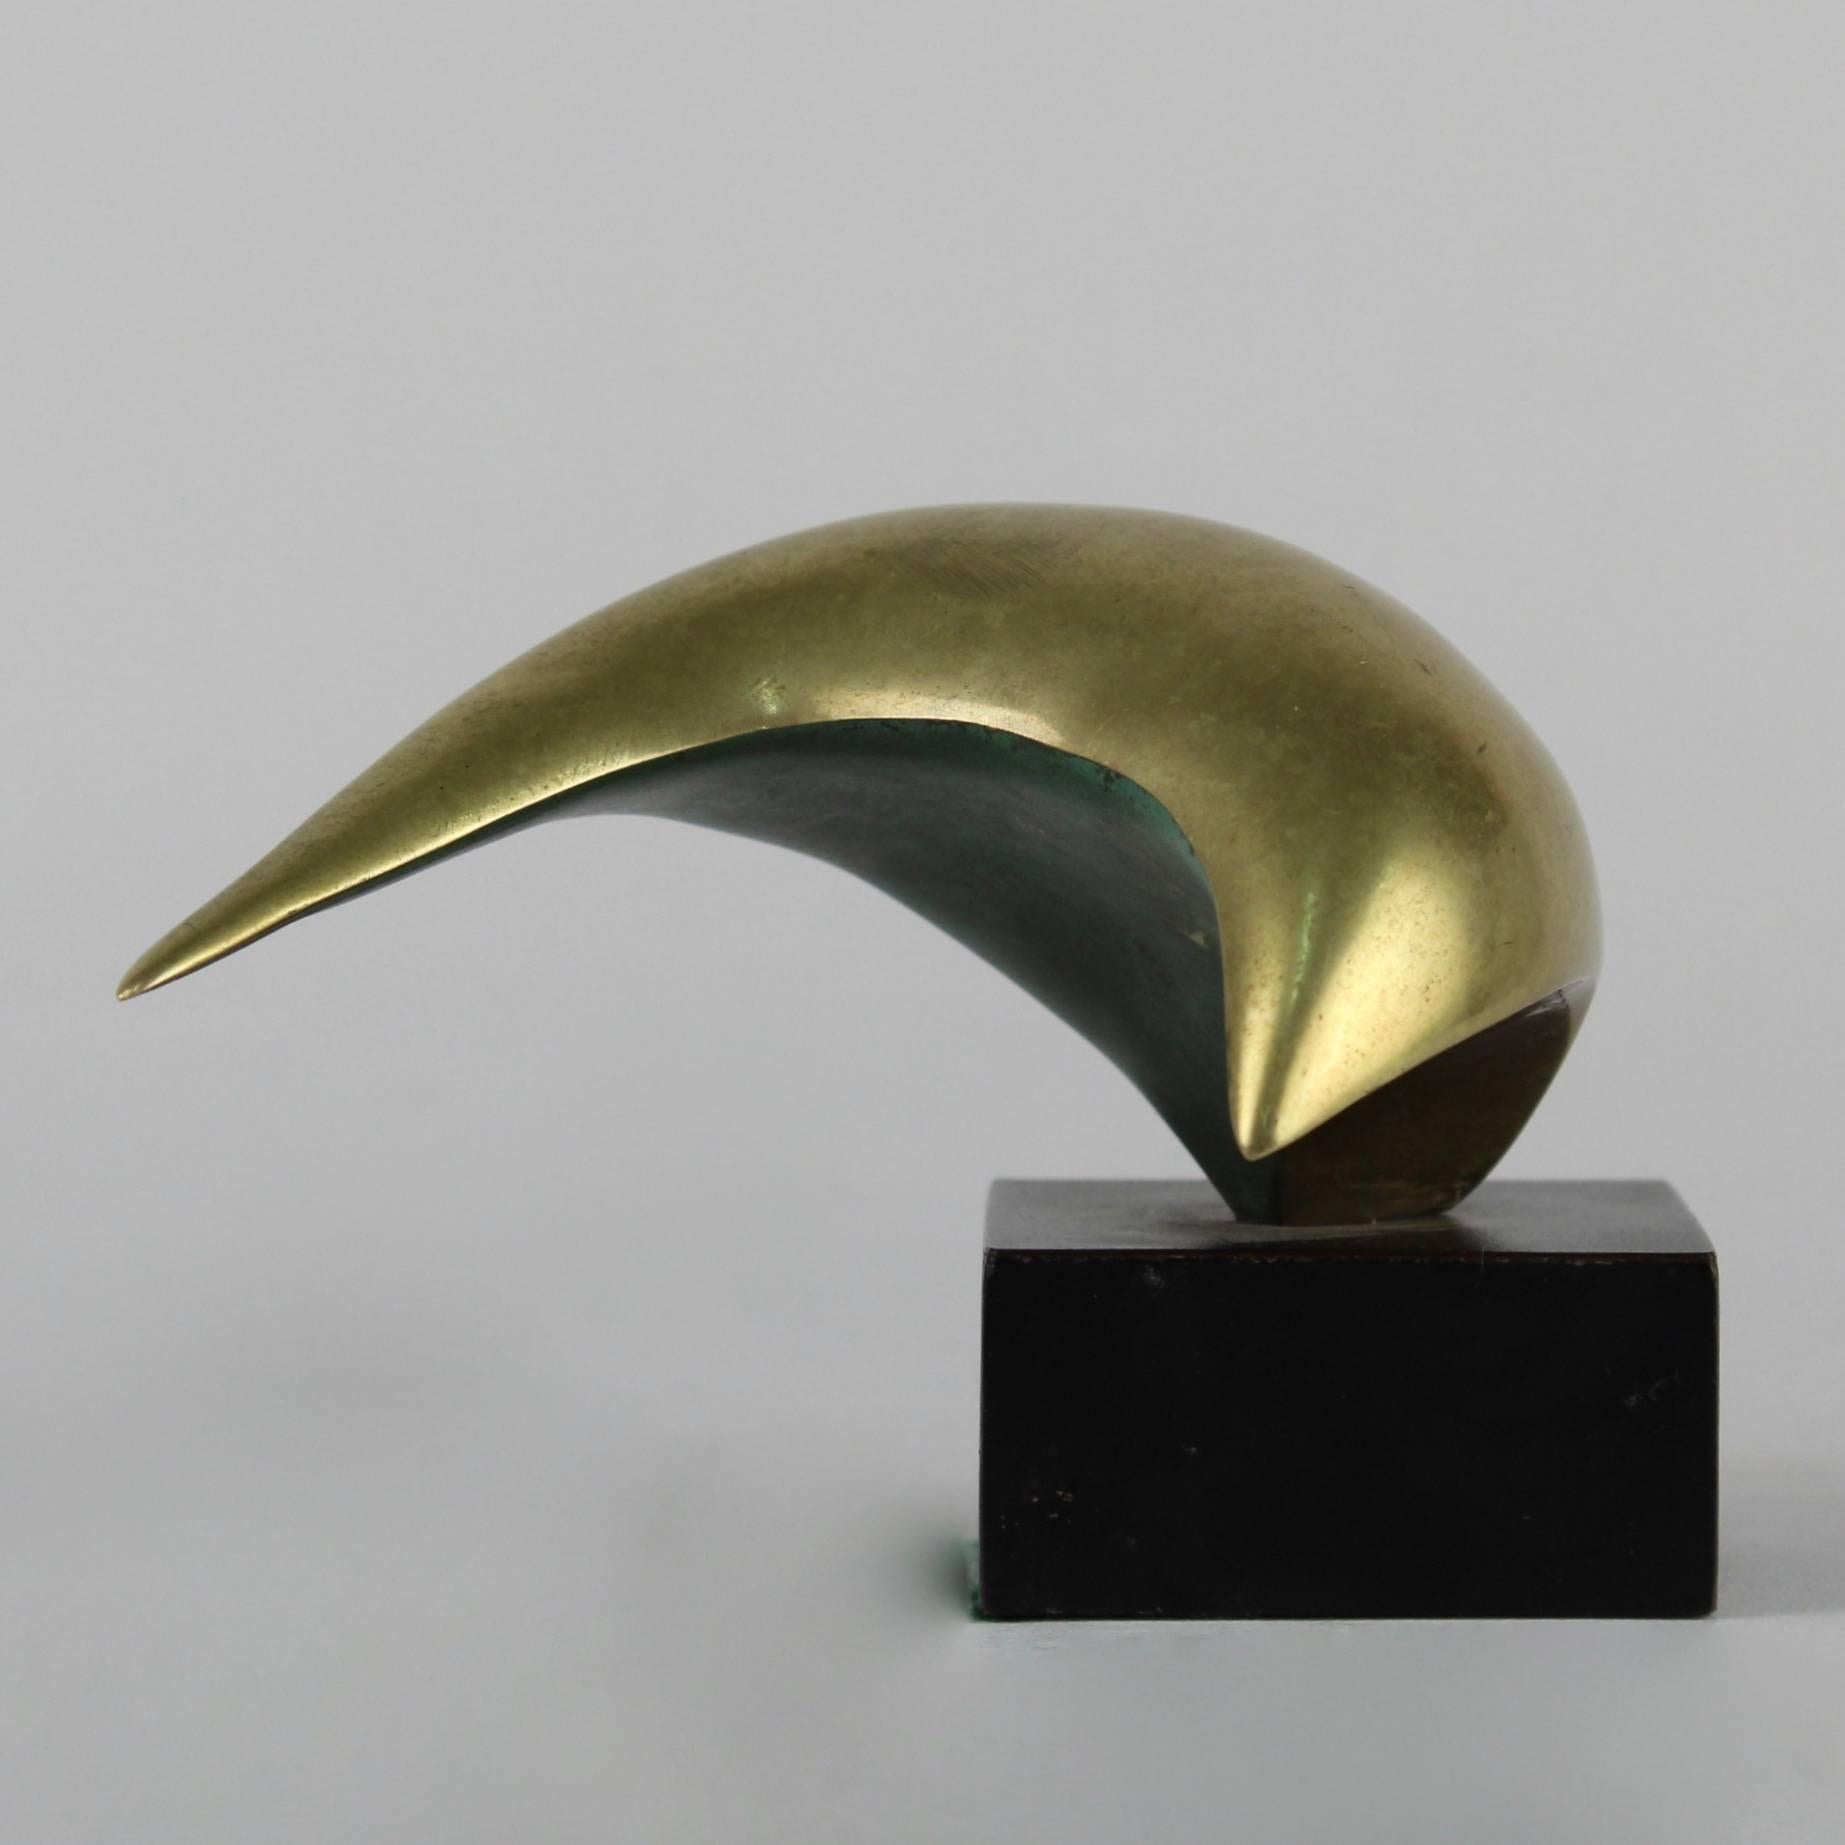 Offered here for your consideration is an organic modernist gilt bronze sculpture of a stylized bird.

Additional Details:
The bronze rests on an artist-made black laminated plinth; the panels of which are slightly askew at the edges. There is wear